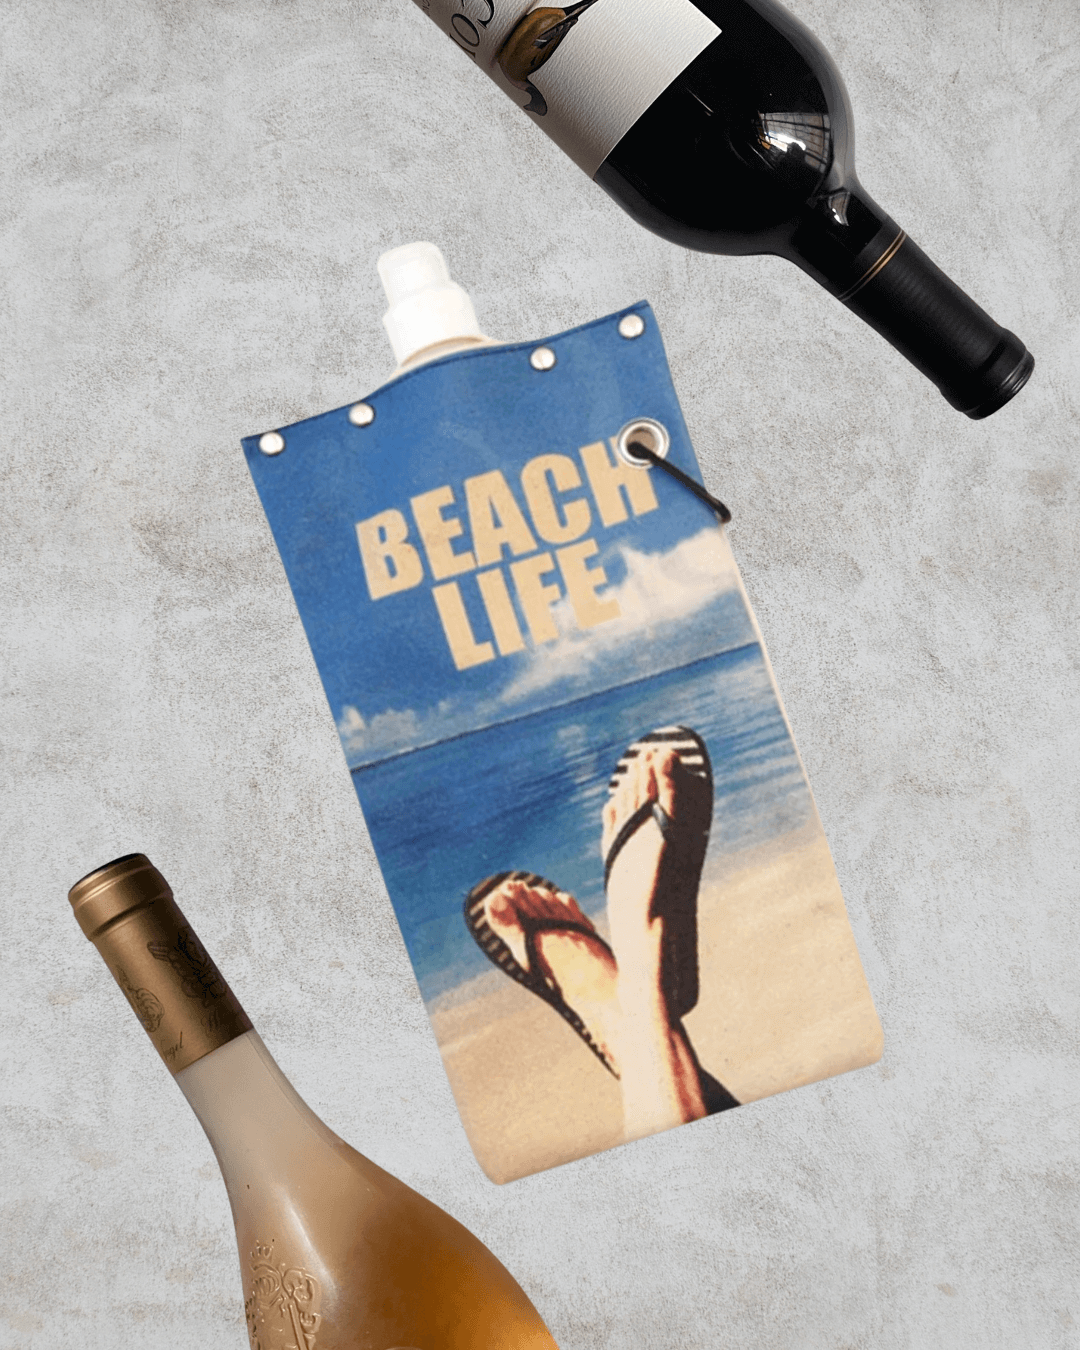 Life Happens Wine Helps 750ml/25oz Canvas Canteen